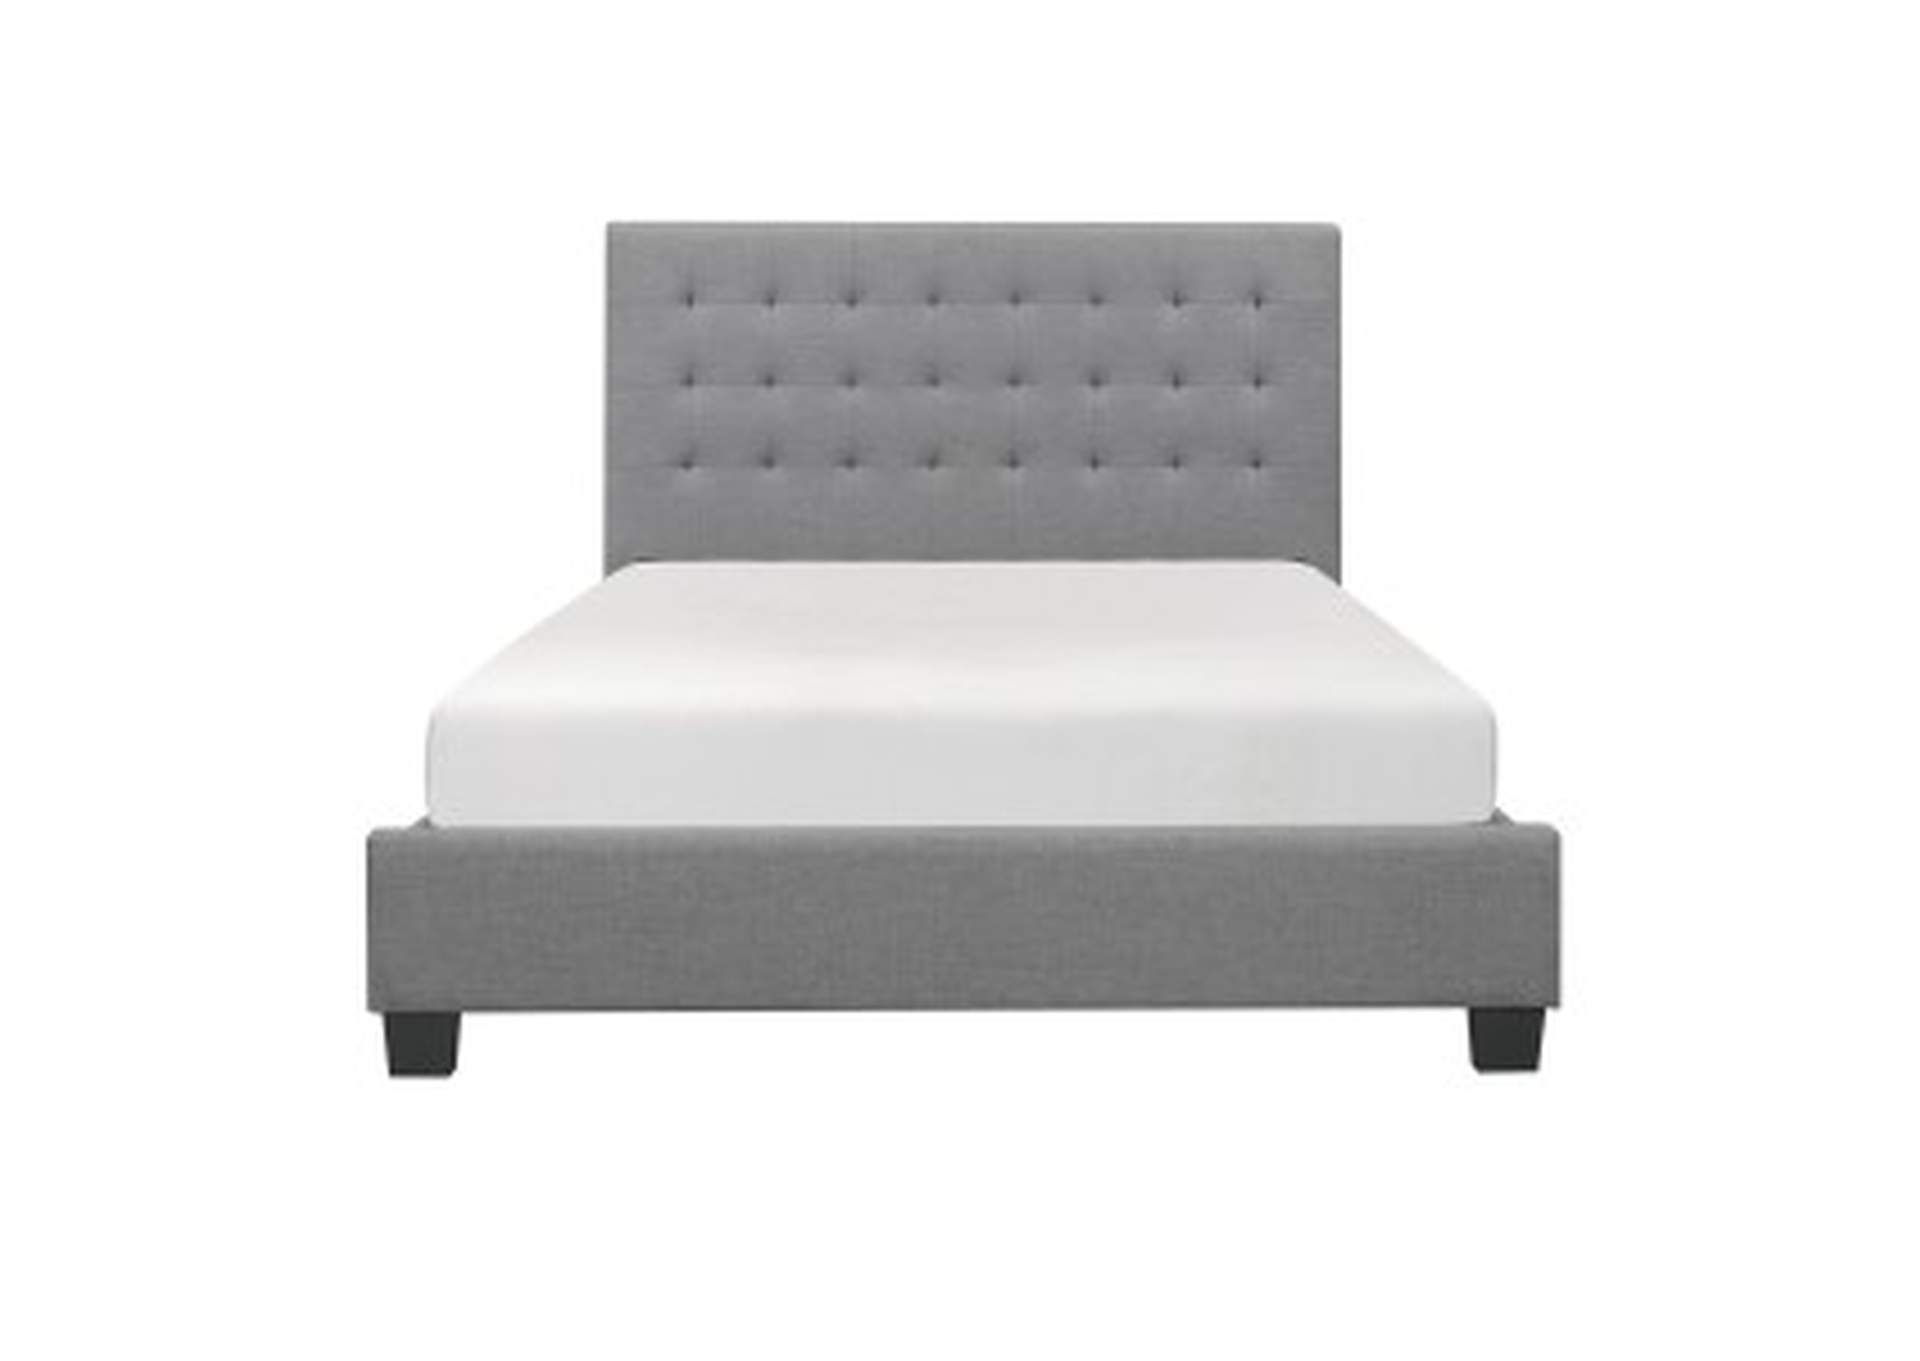 Lawrence Queen Bed In A Box,Homelegance